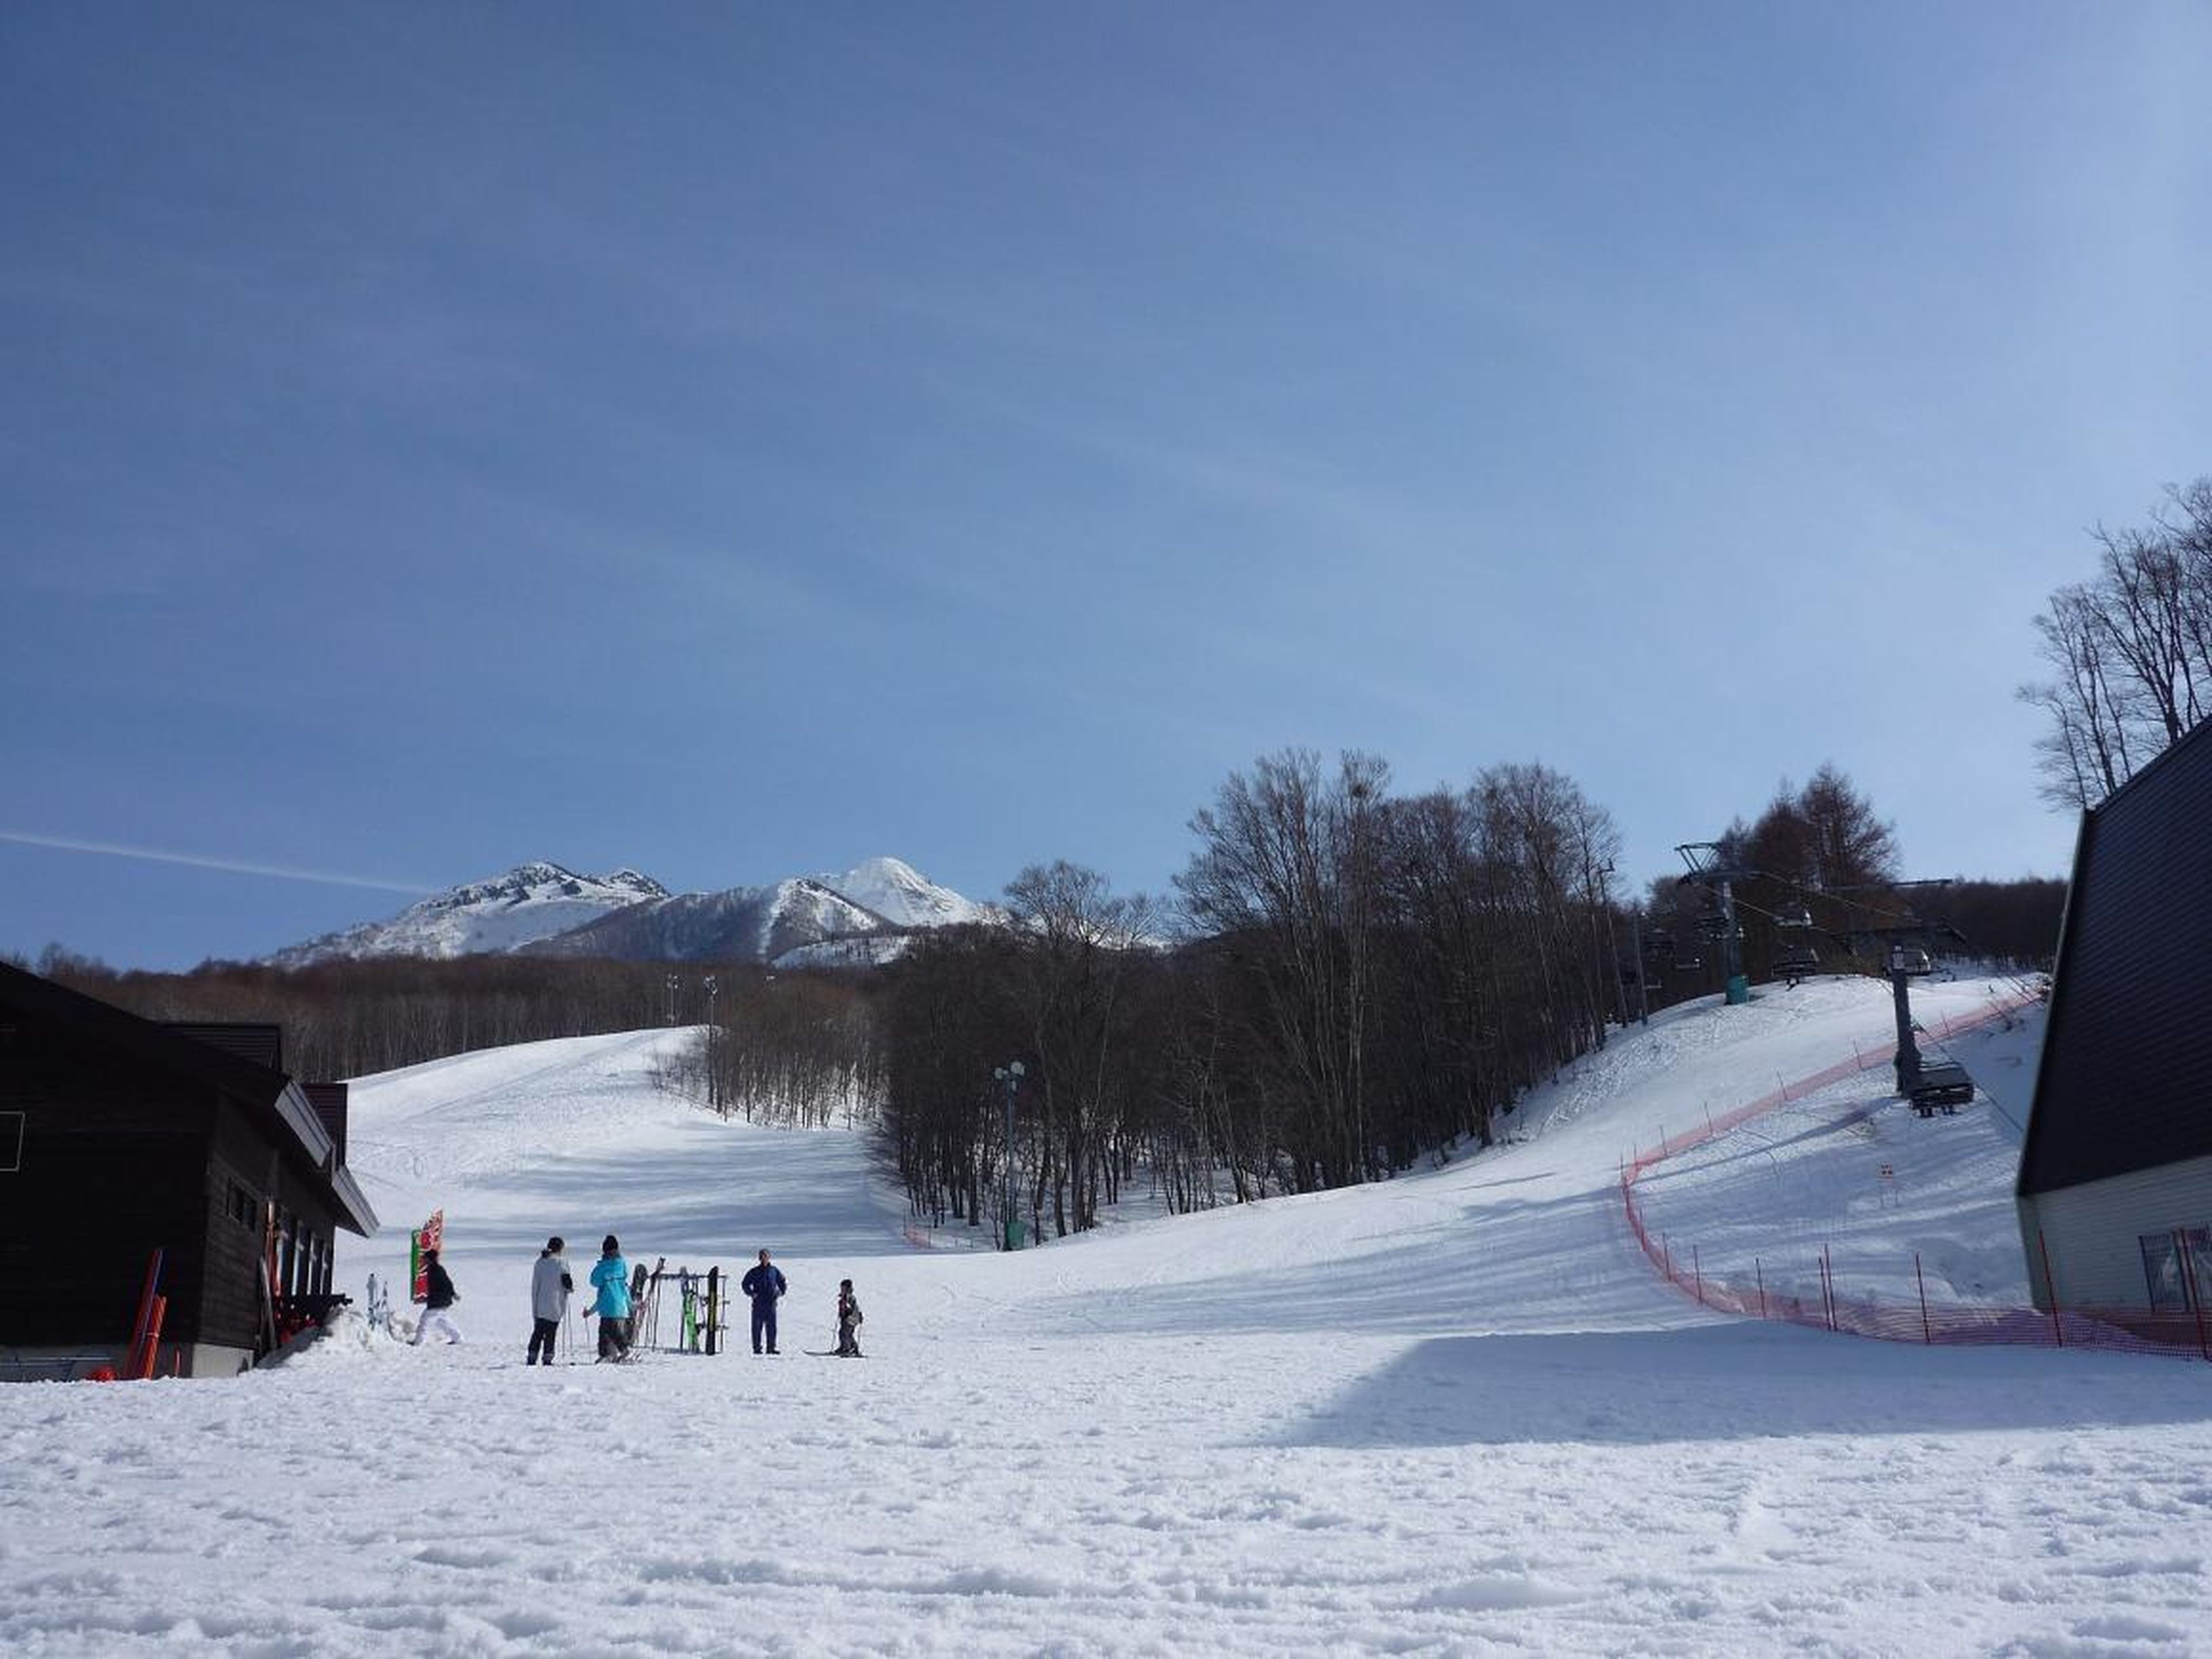 During the winter, Aomori is a popular tourist destination. People come from all over to visit the ski resorts.